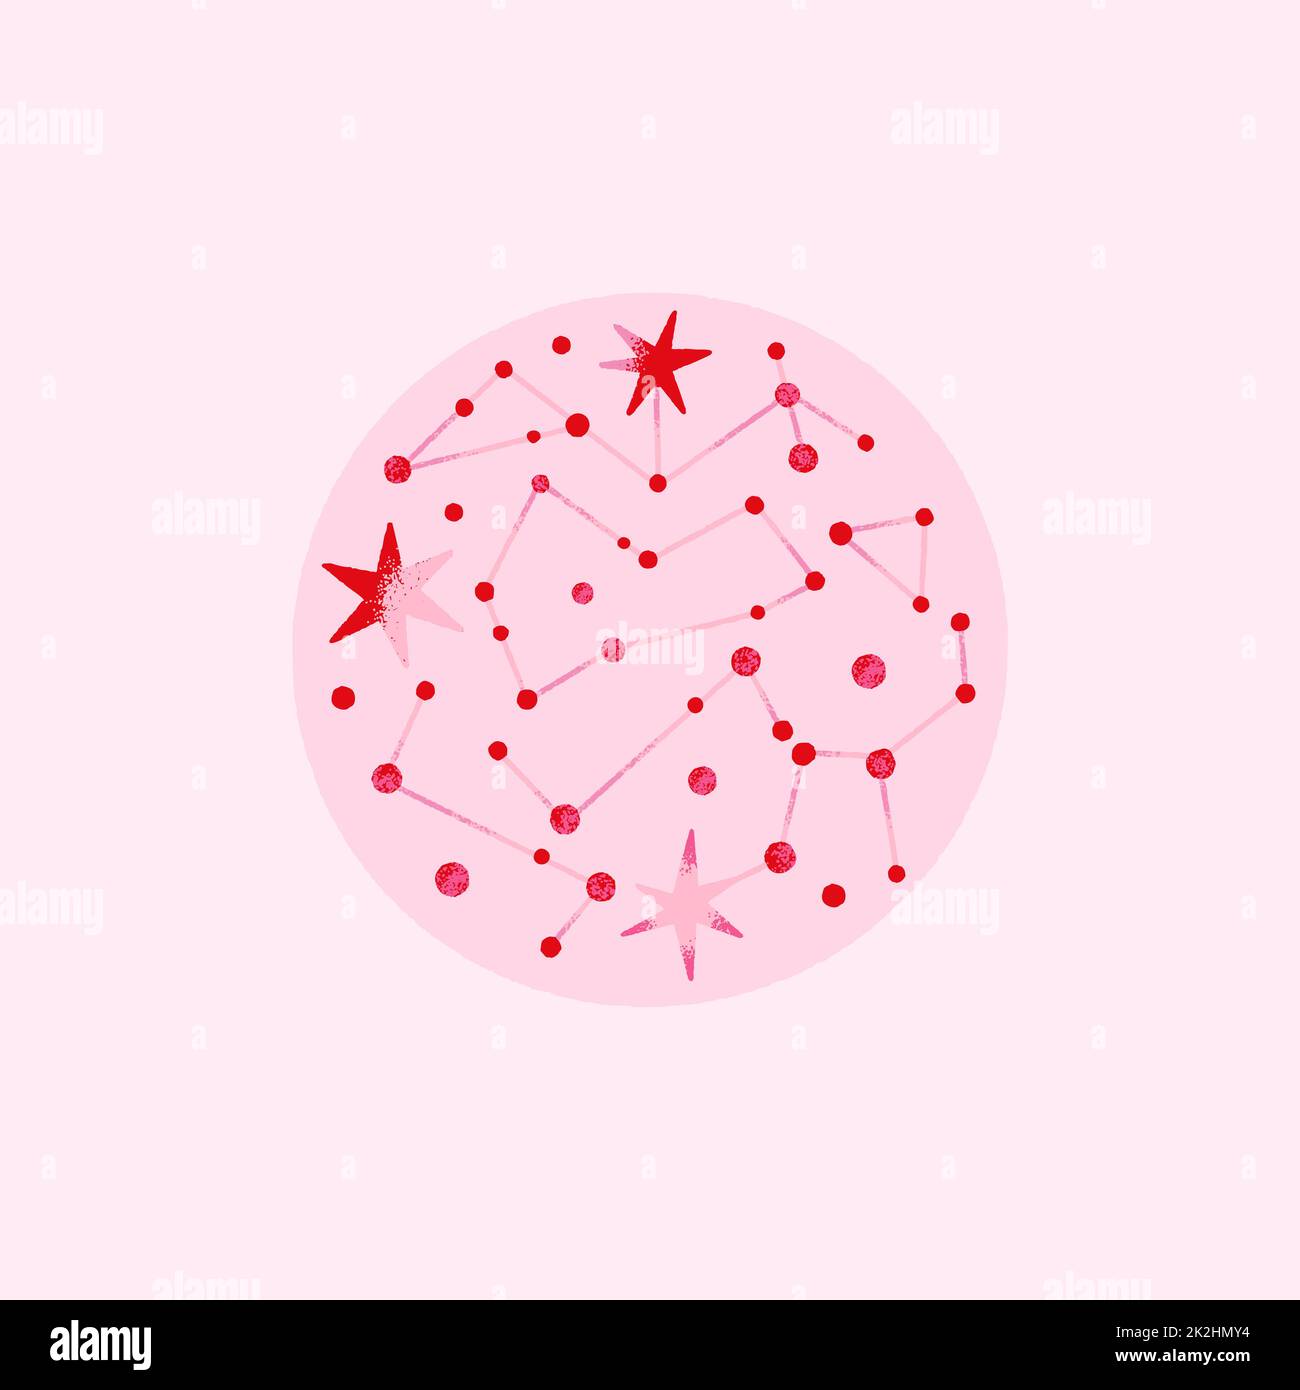 Space composition with planets and stars in pink, red colors. Vector illustration on theme of astrology, astronomy Stock Photo